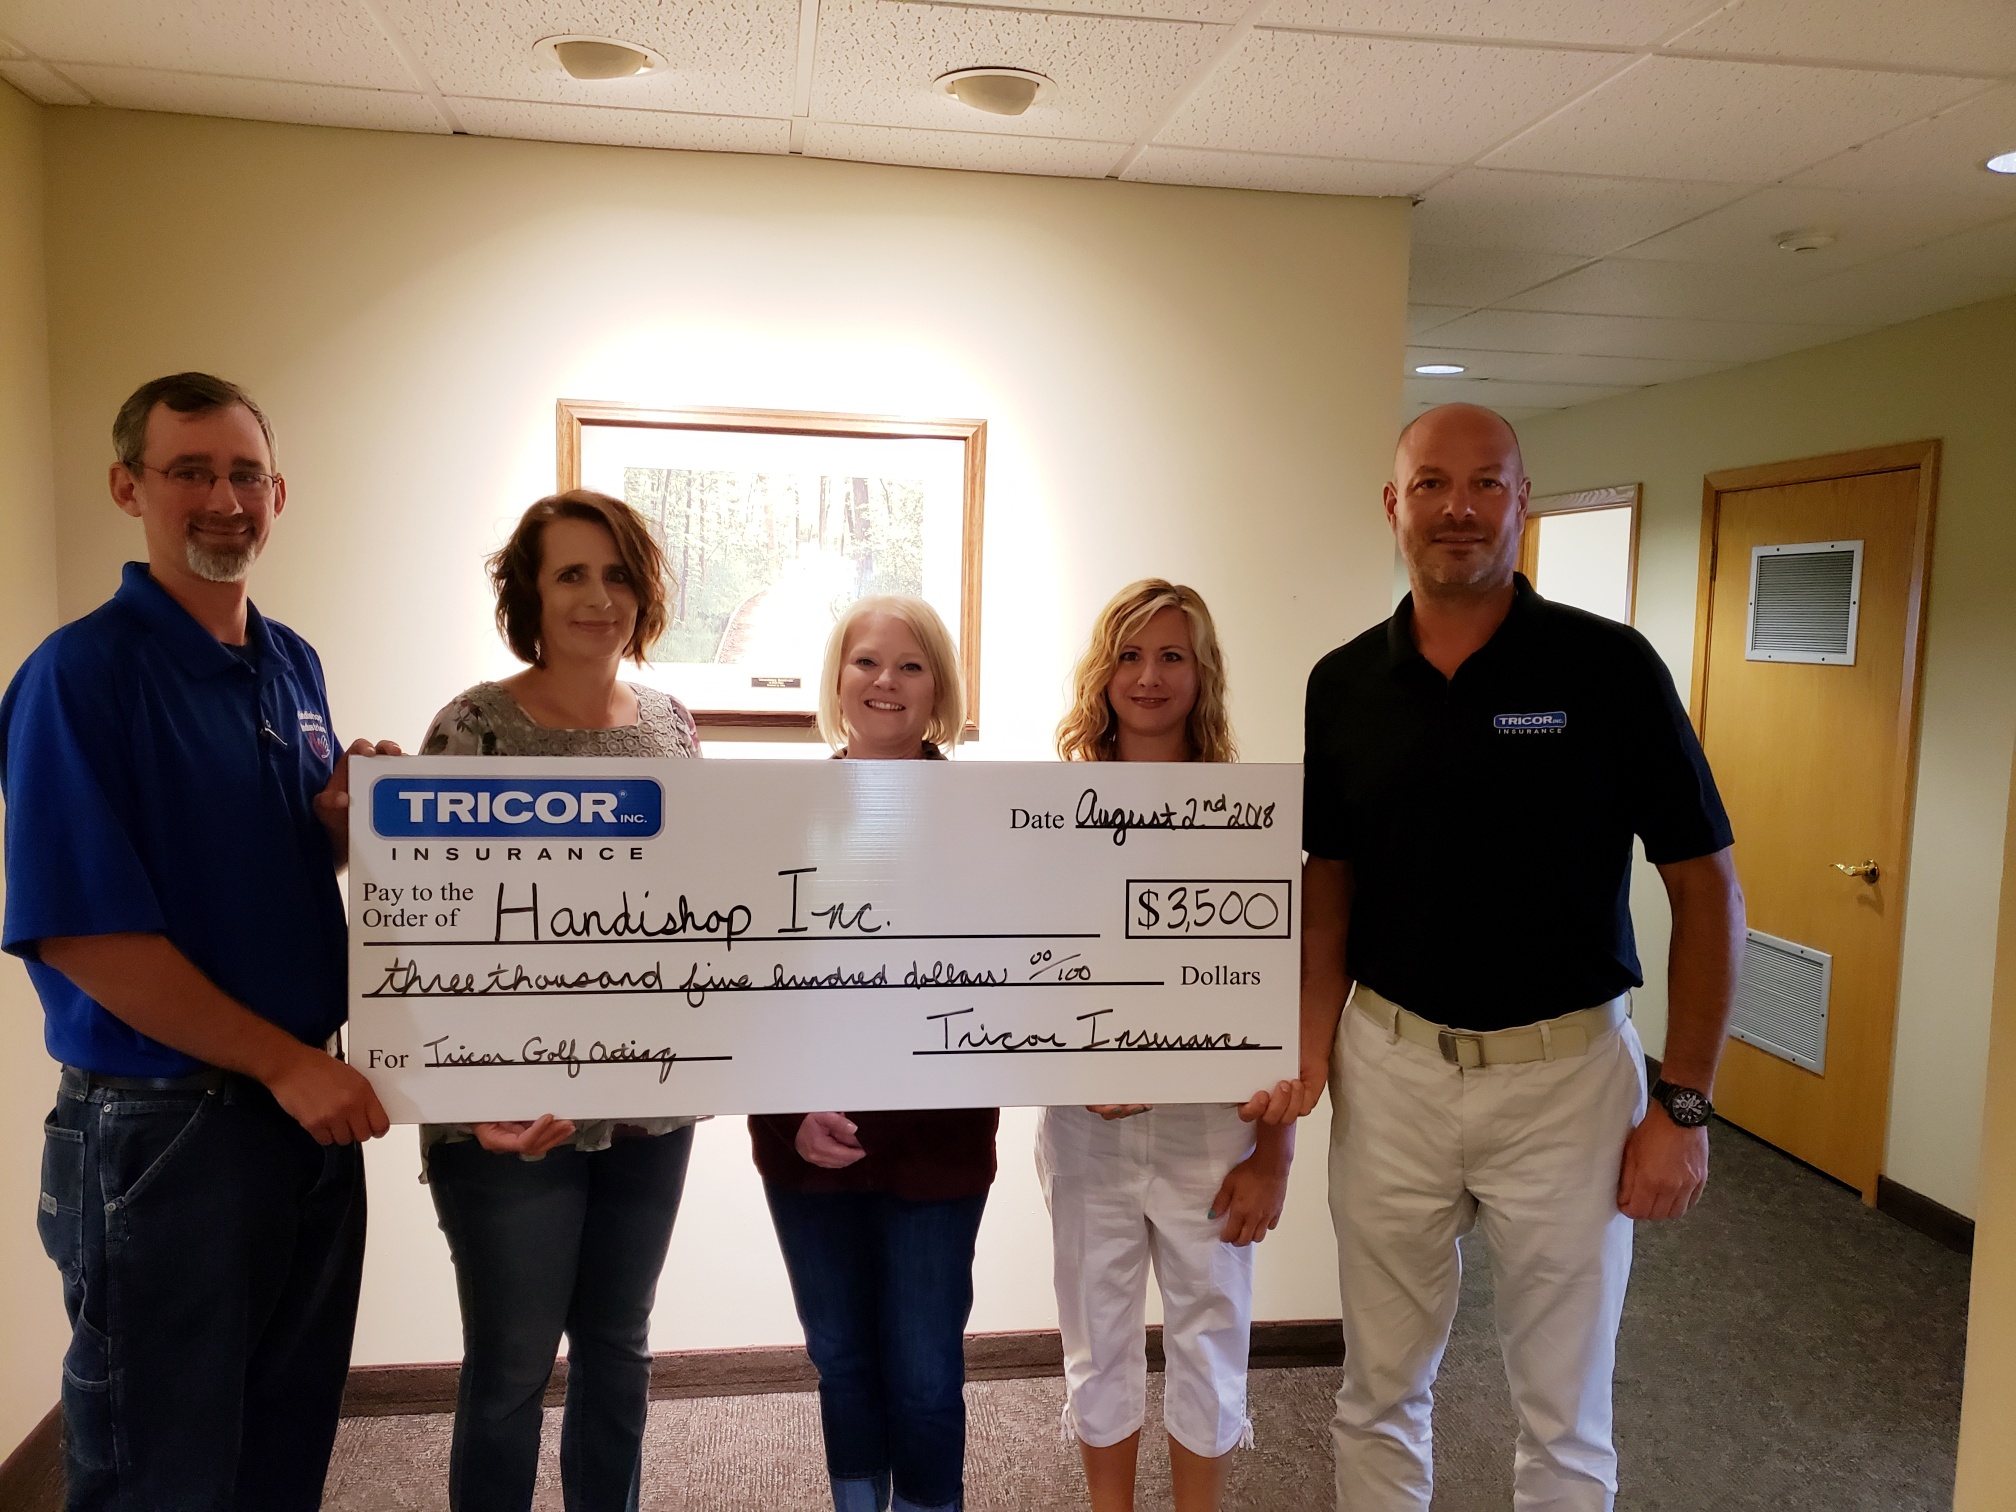 TRICOR gives back to Handishop Industries, Inc 